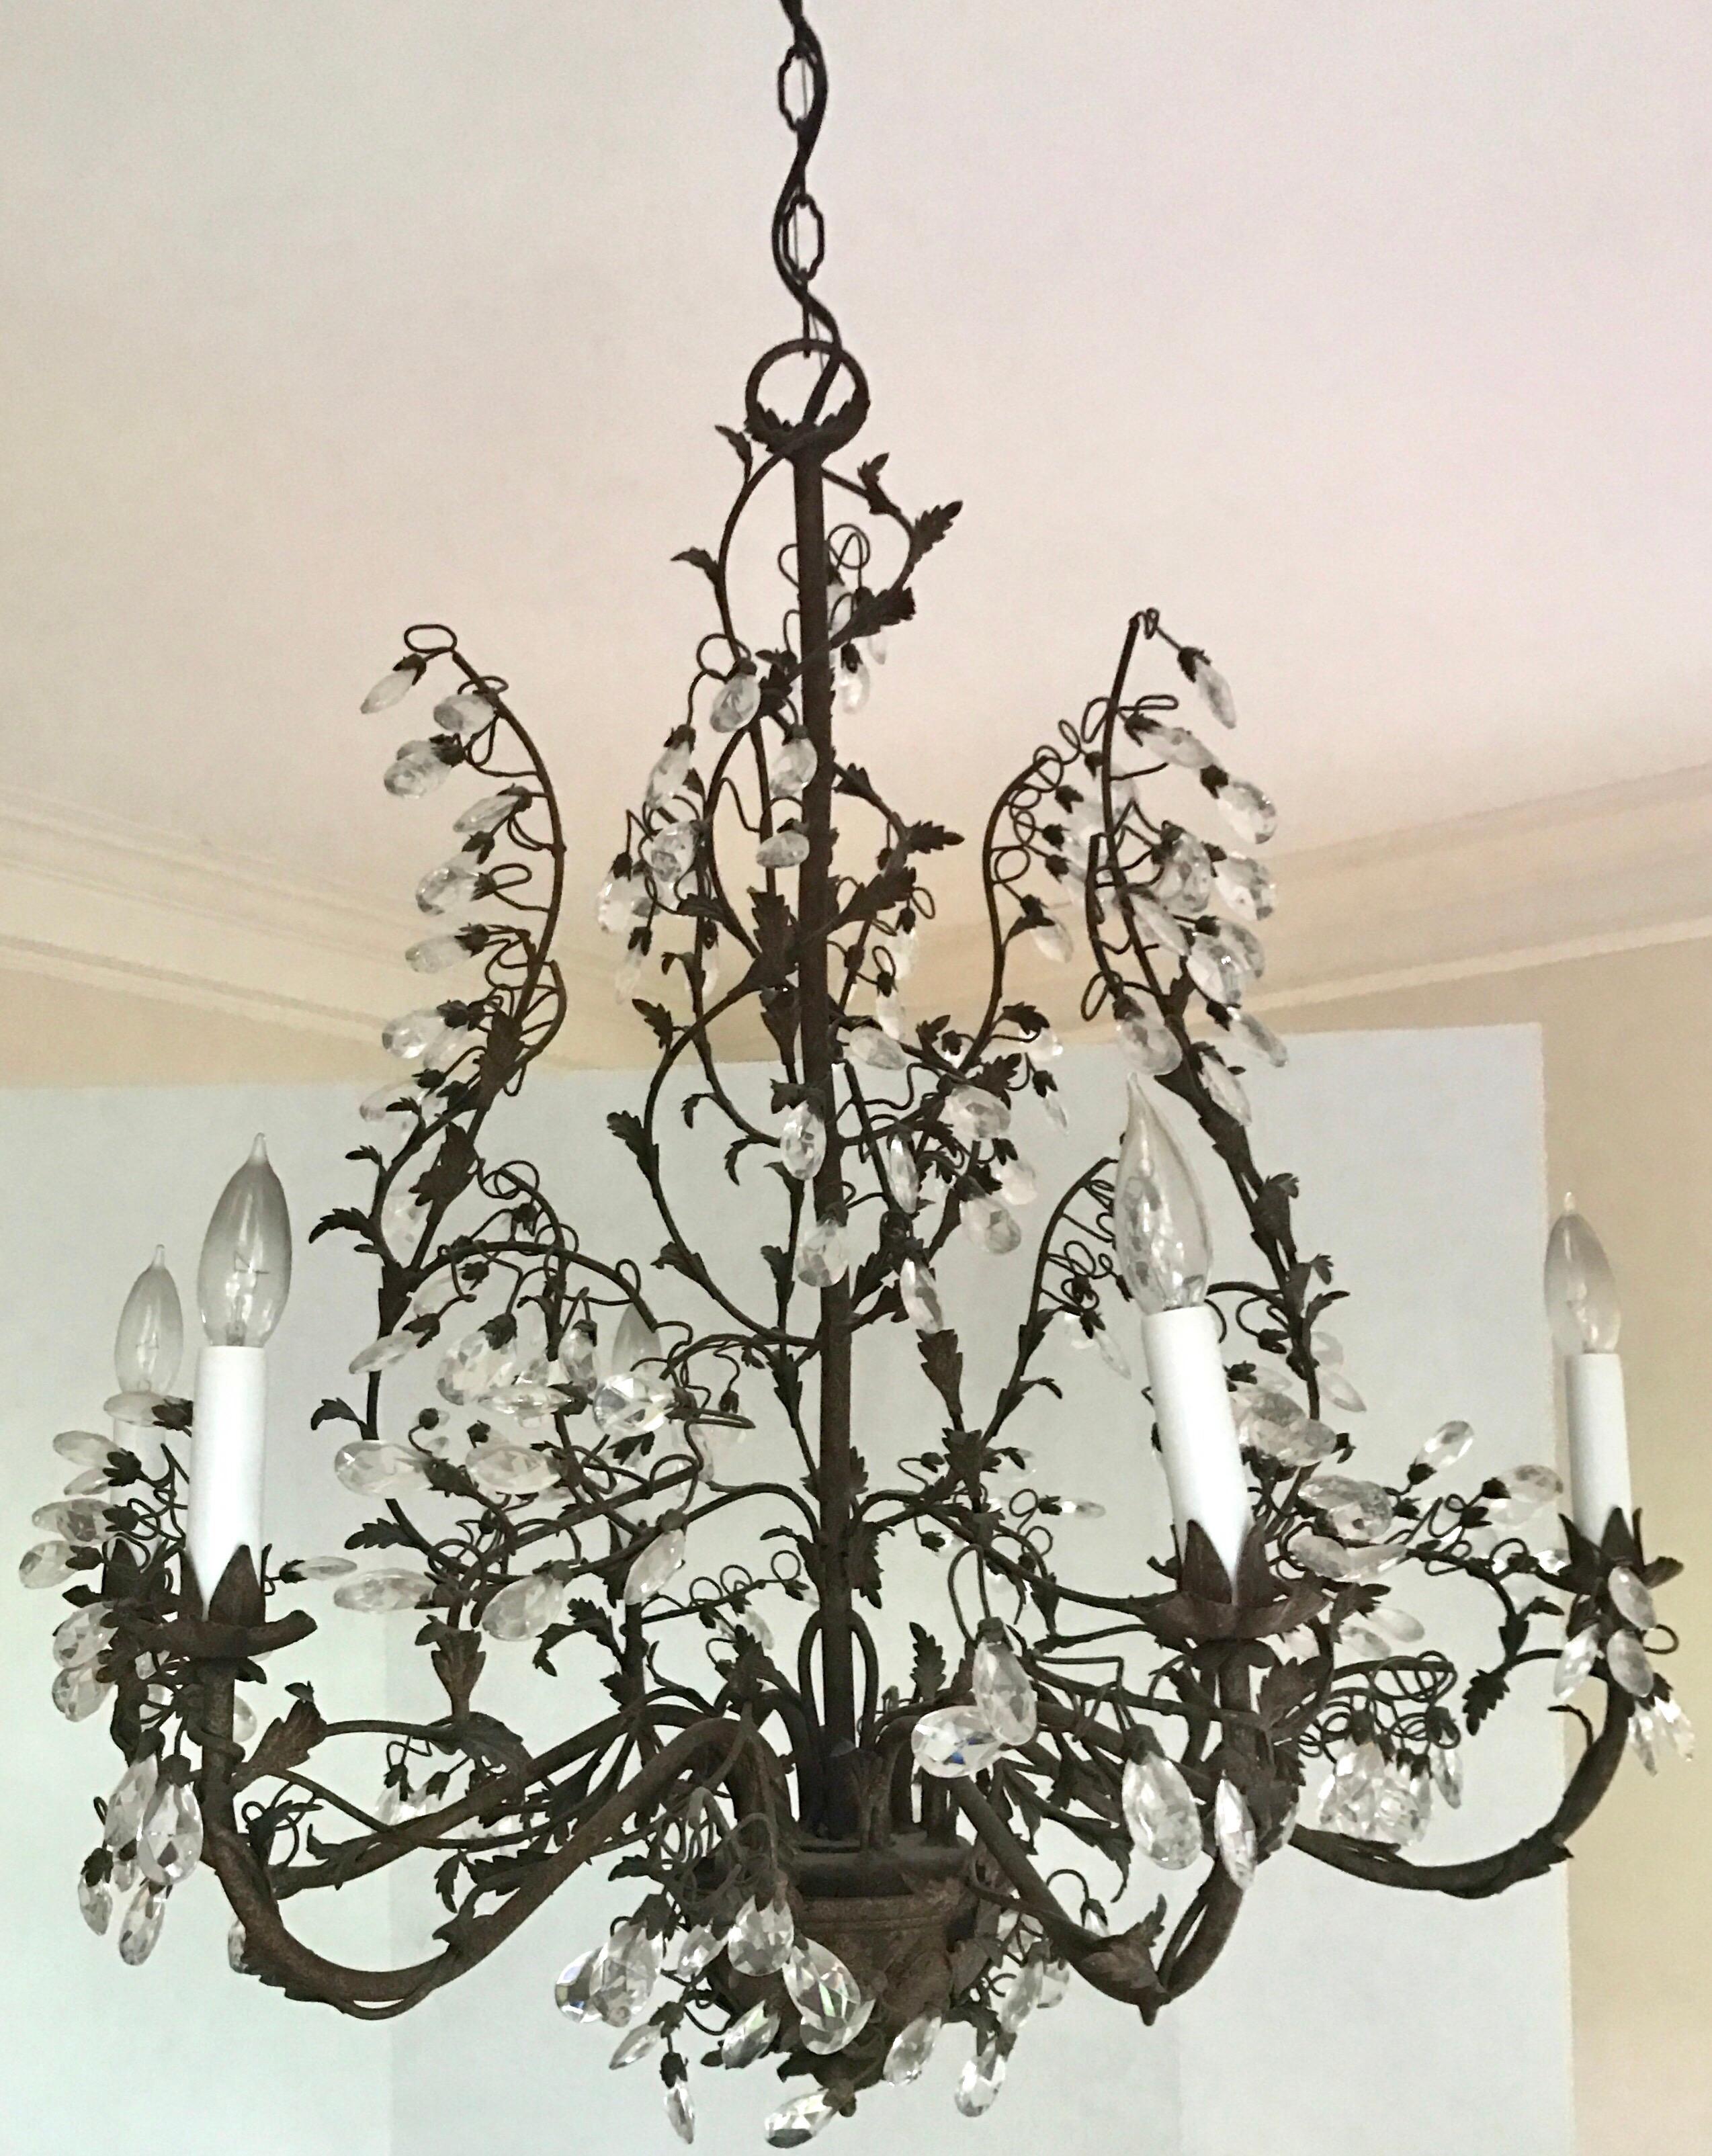 Magnificent tole vines with crystals running throughout six-light chandelier.